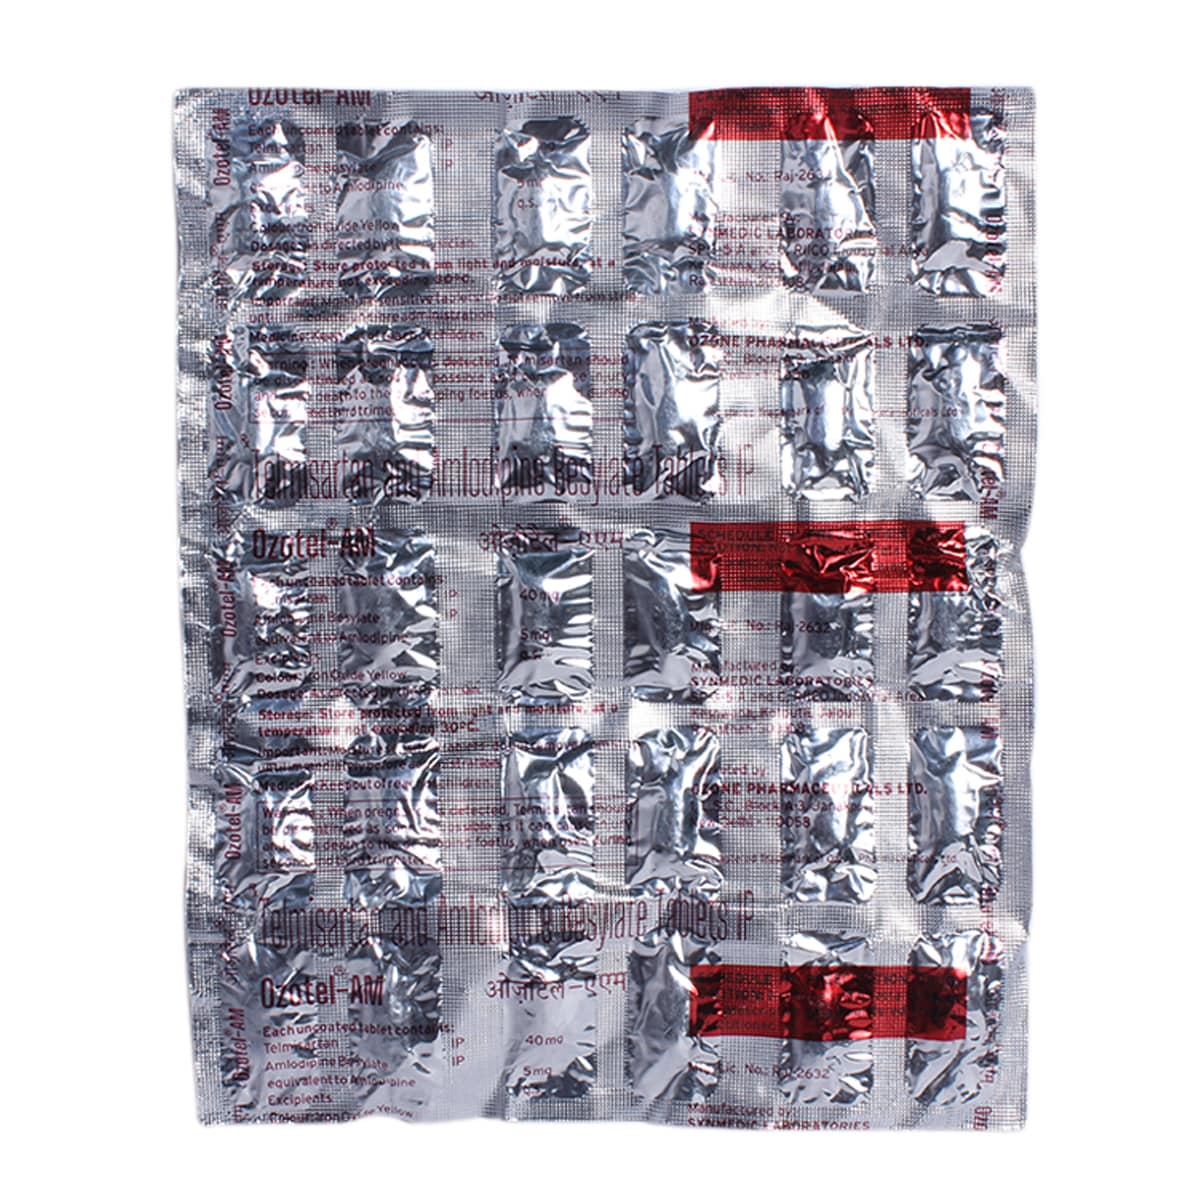 Ozotel-Am 40/5mg Tablet 30's Price, Uses, Side Effects ...